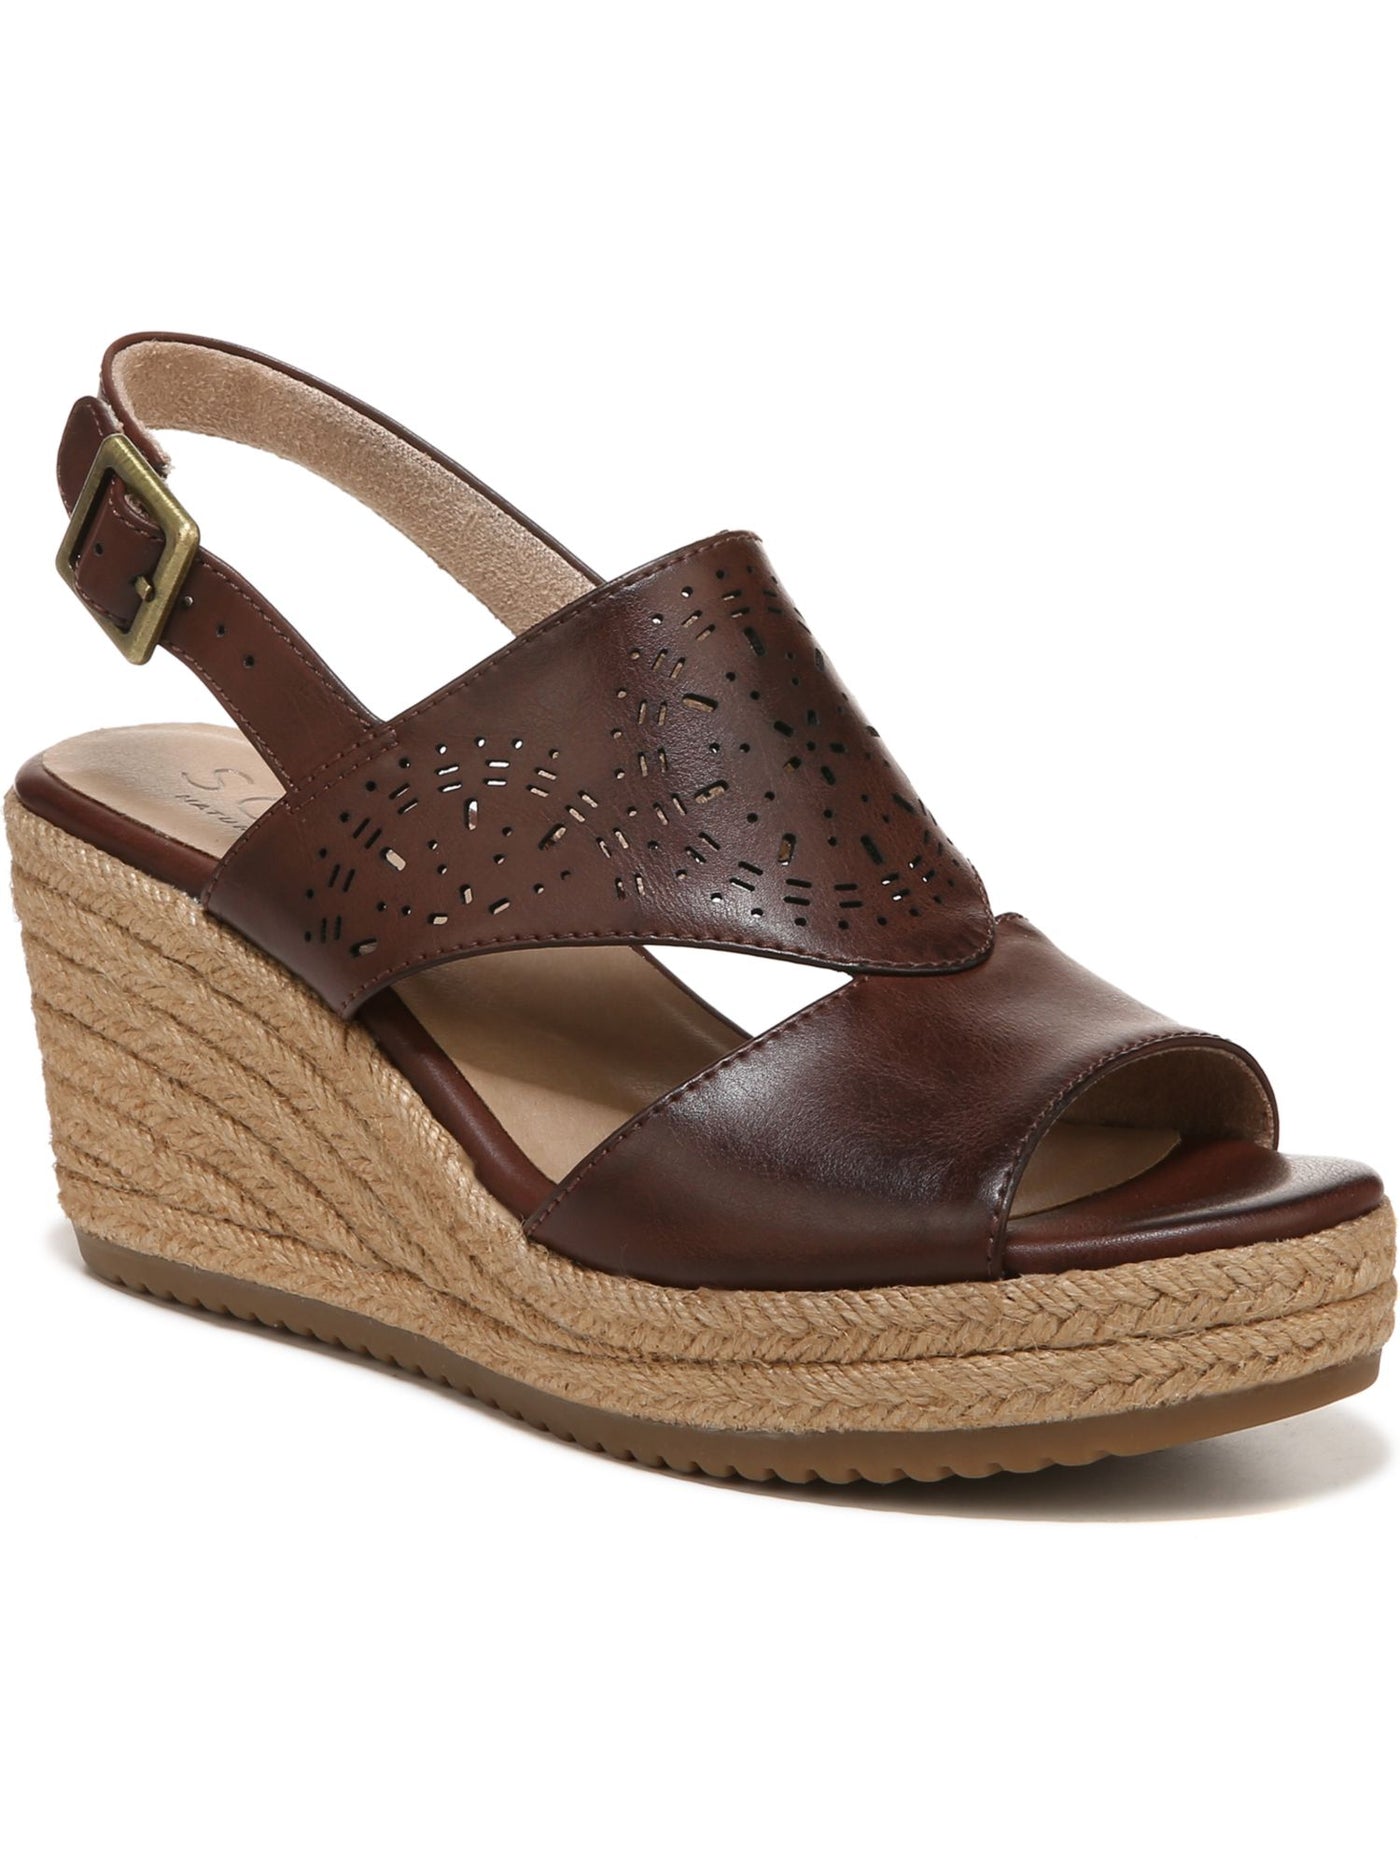 SOUL BY NATURALIZER Womens Brown 1" Espadrille Platform Padded Cut Out Arch Support Ocean Round Toe Wedge Buckle Slingback Sandal 9 W